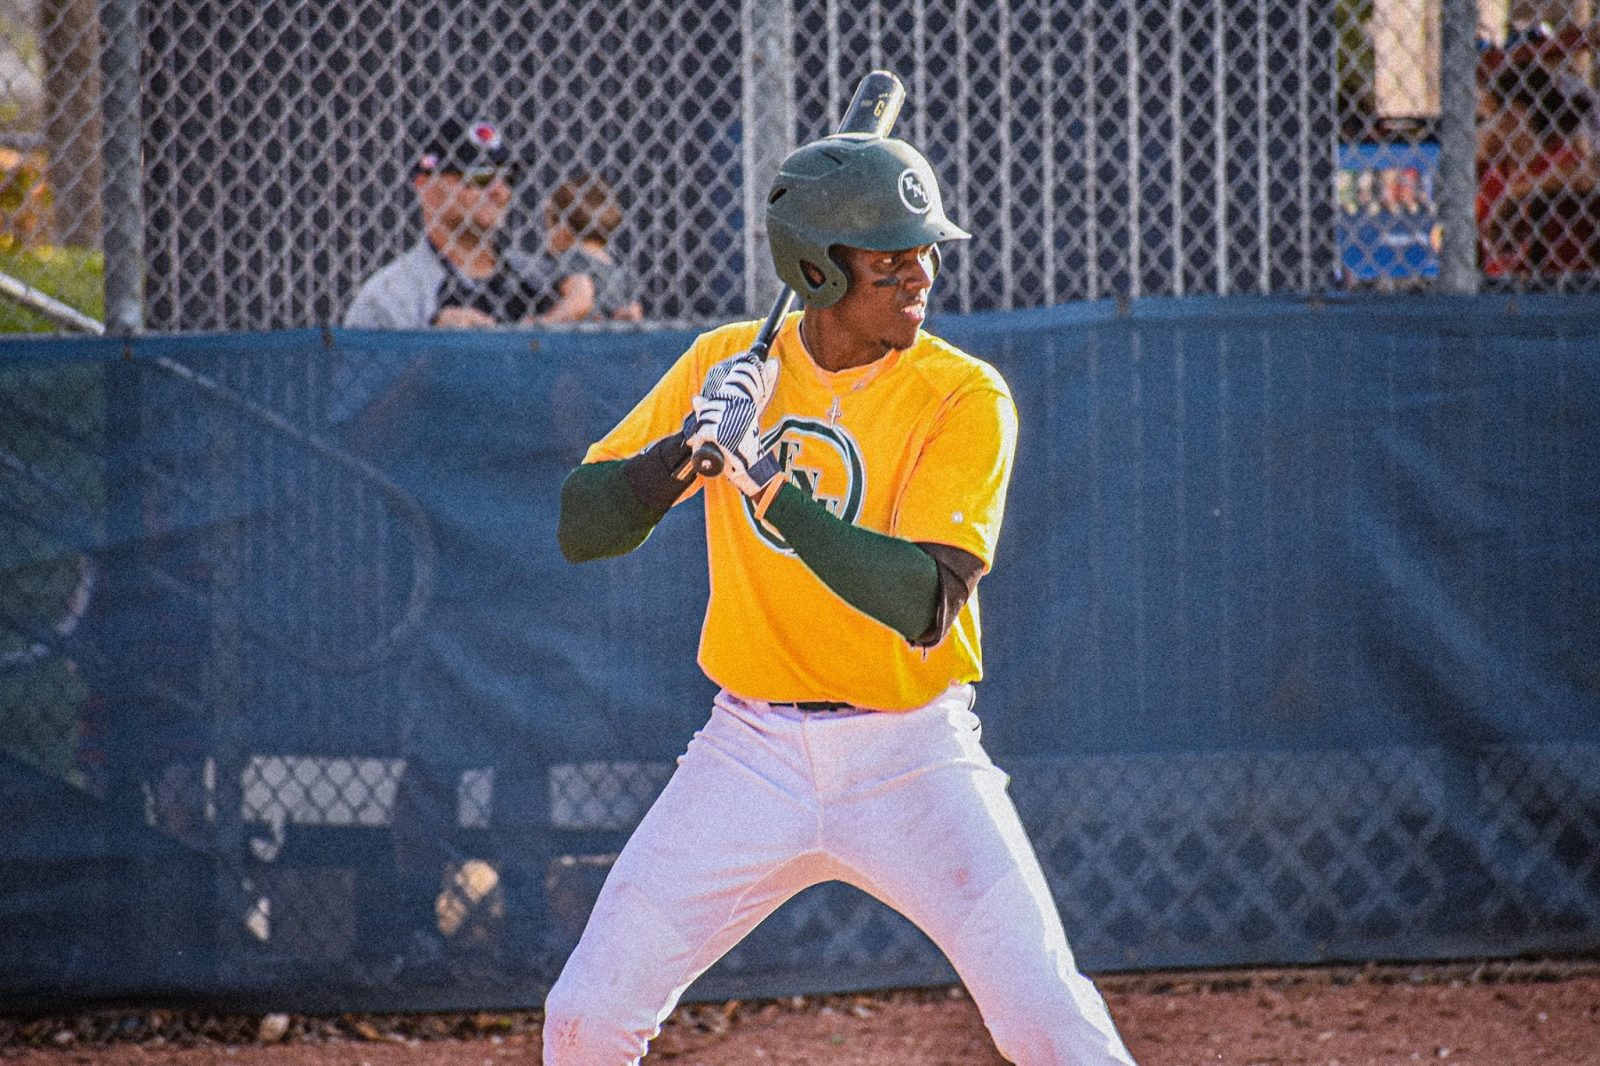 Baseball player batting in the game